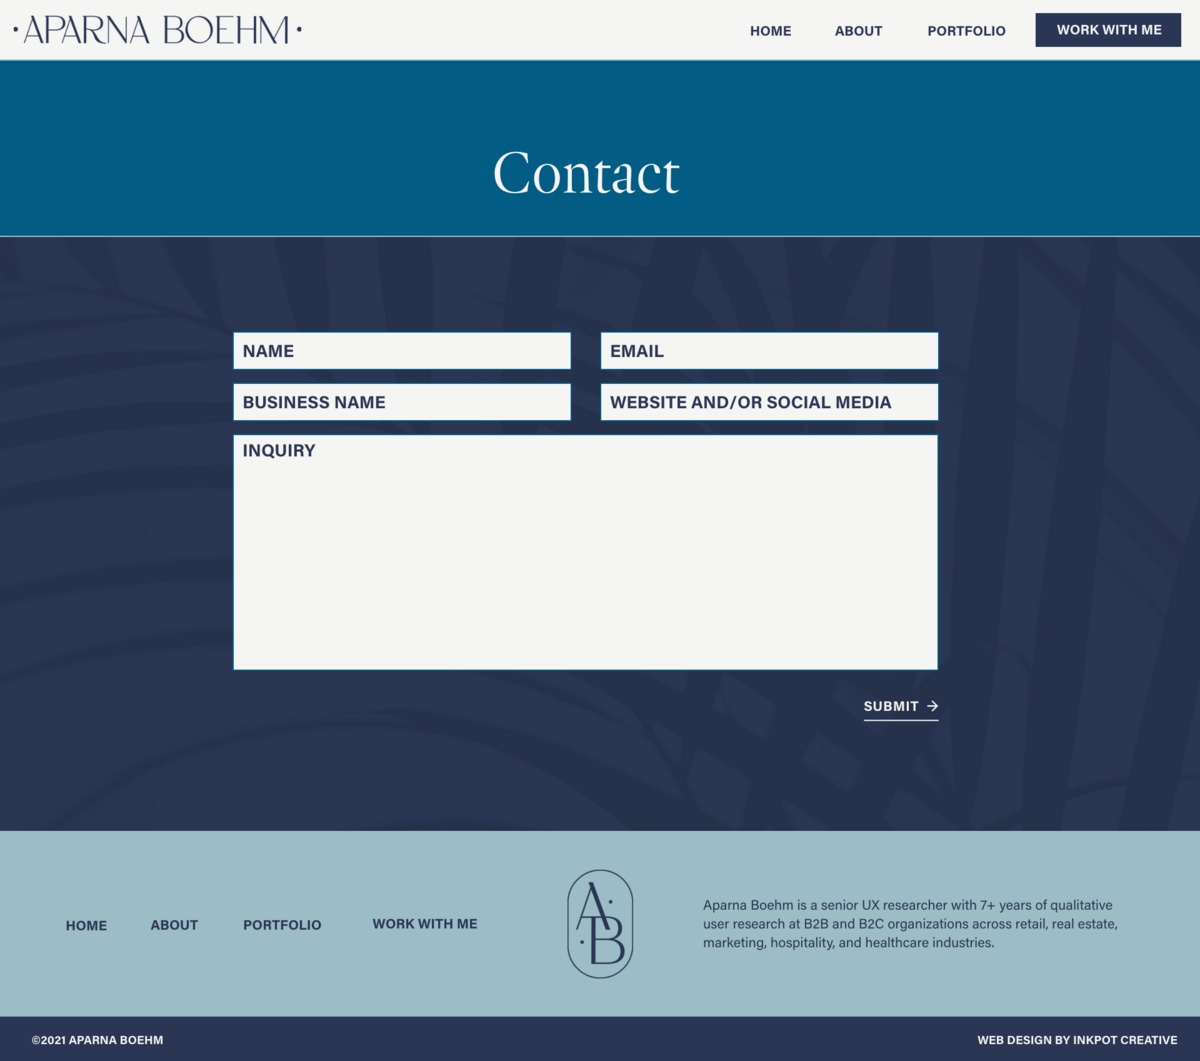 screenshot of full contact page